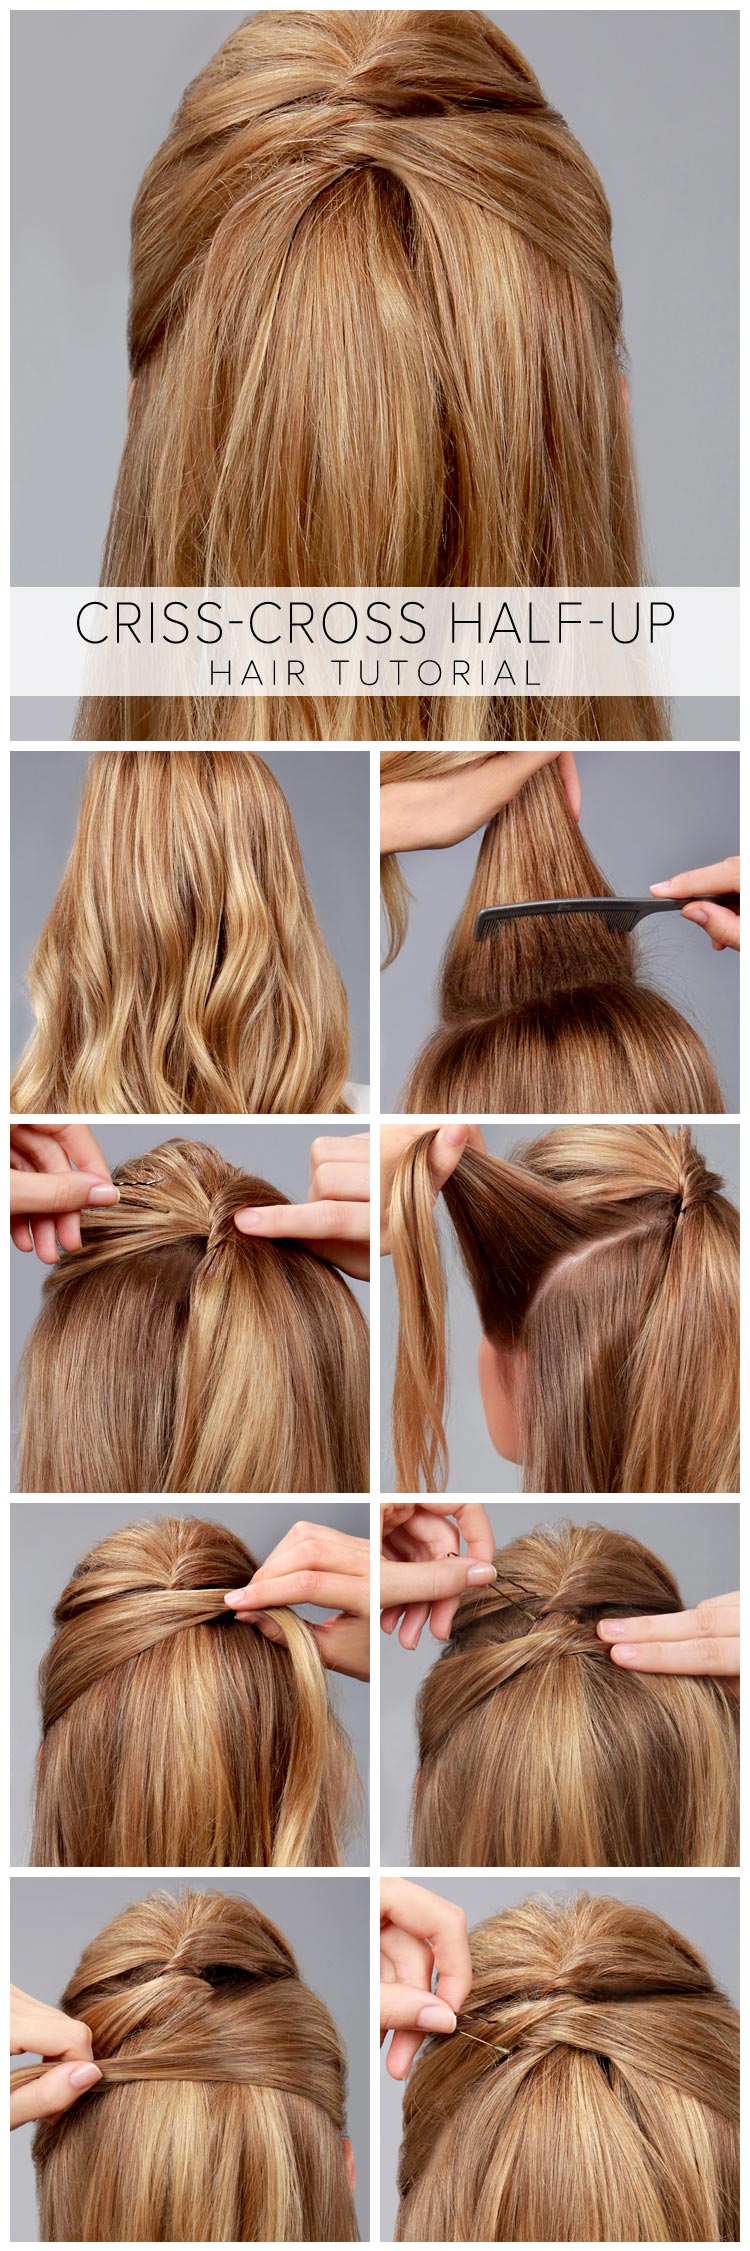 25 five minute or less hairstyles that'll save you from busy